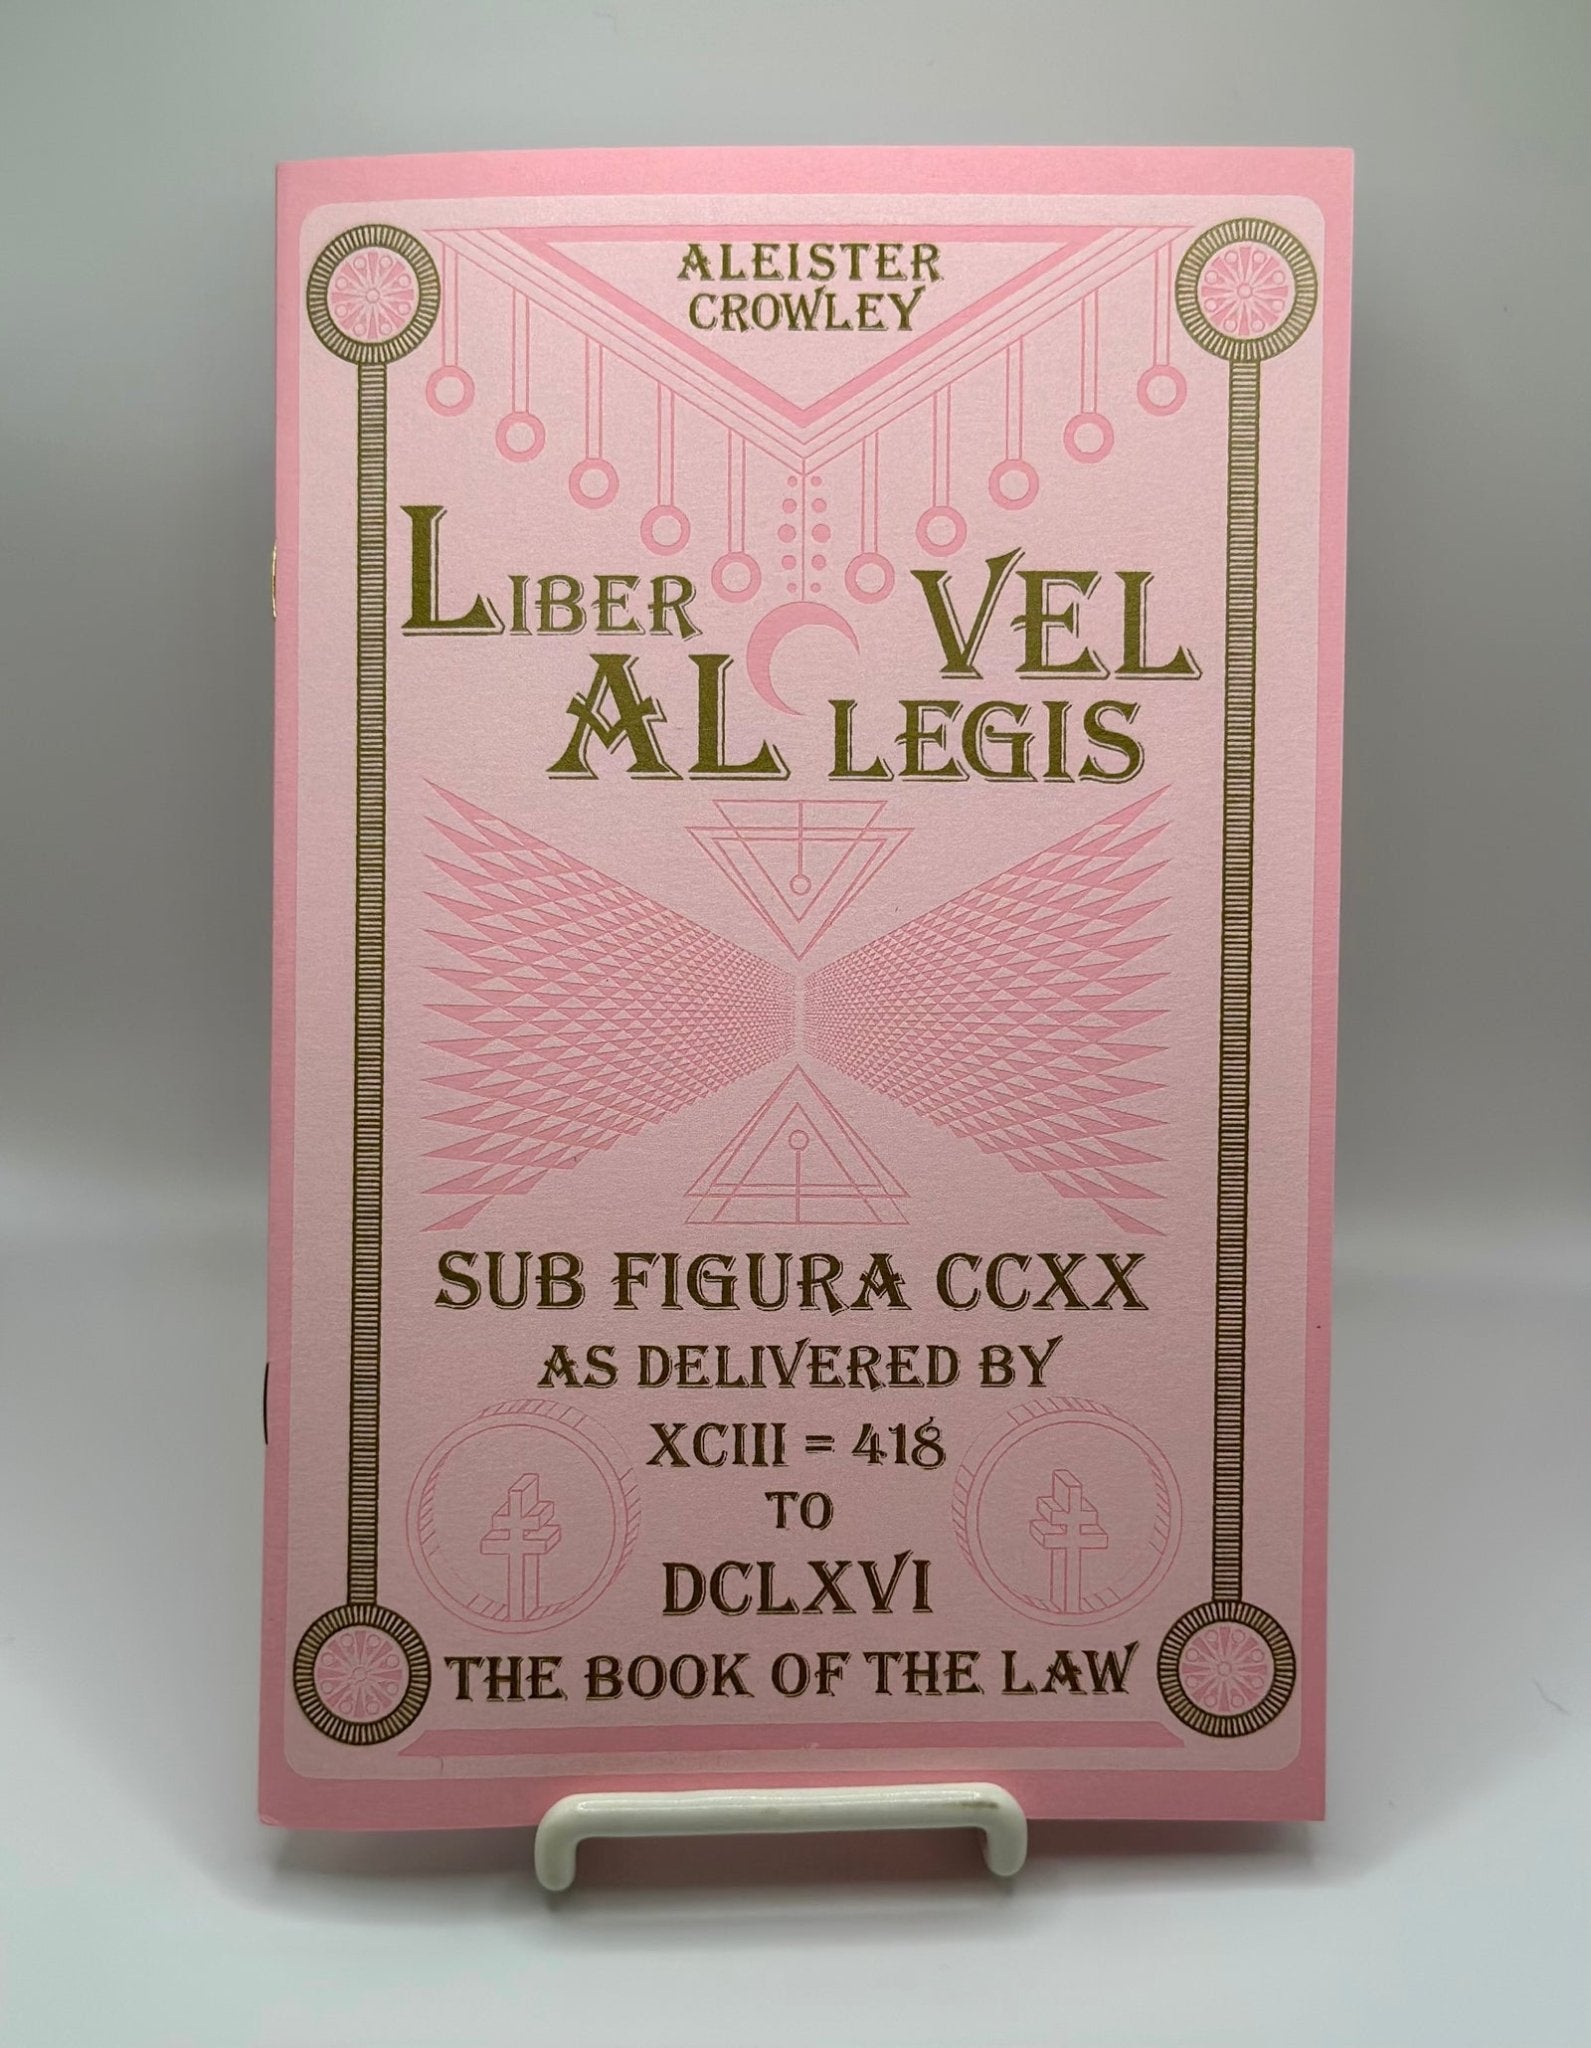 Book of the Law by Aleister Crowley - Exalted Funeral